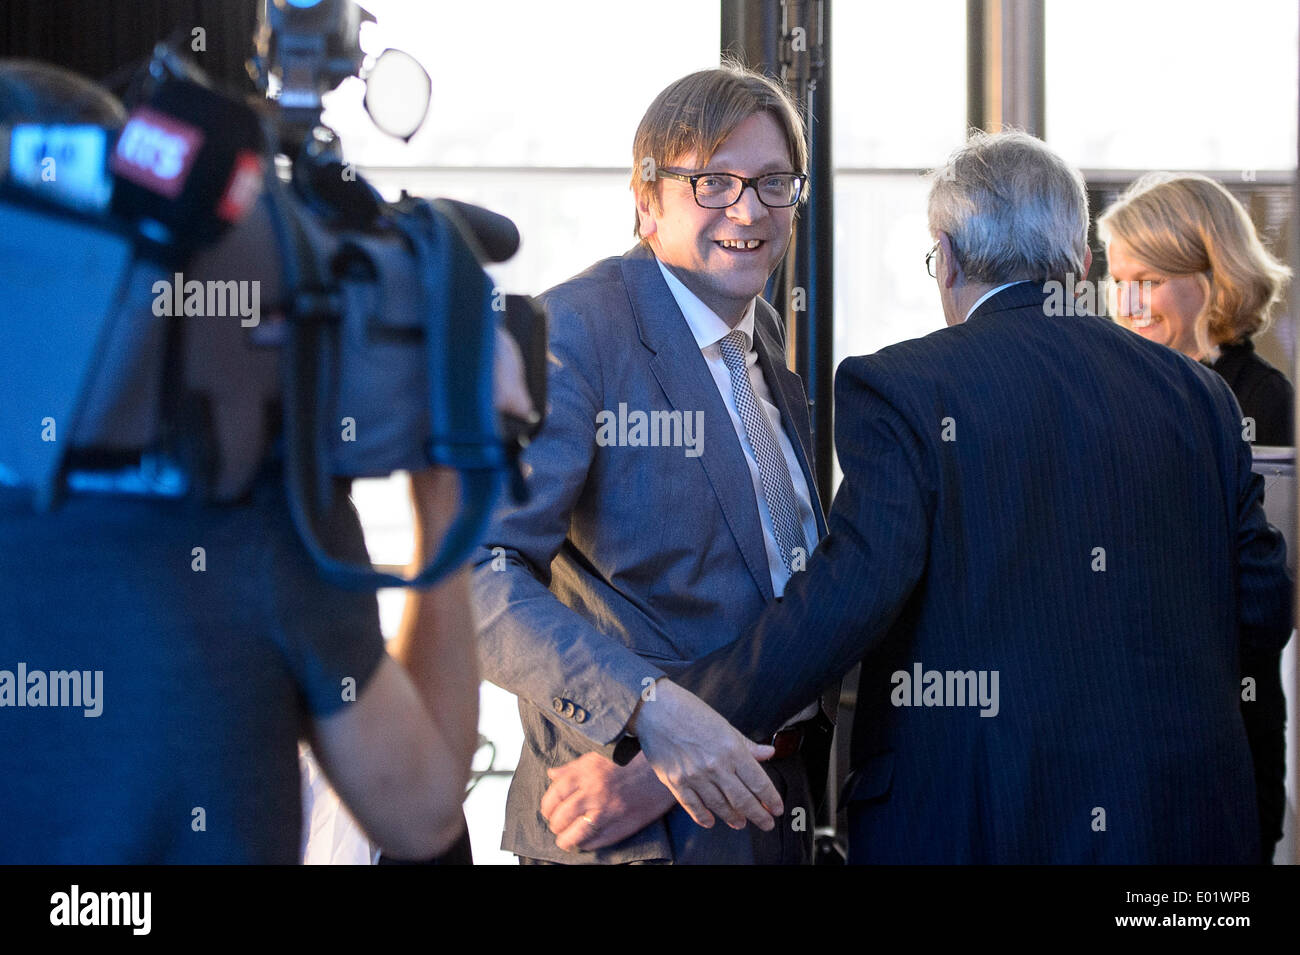 Brussels, Belgium. 29th April 2014. Guy Verhofstadt, top candidate of Liberals (ALDE) ahead of Euranet's 'Big Crunch' Presidential debate at the EU parliament in BrusselsThe four top candidates for the presidency of the European Commission - Jean-Claude Juncker, Ska Keller, Martin Schulz and Guy Verhofstadt - attend EU-wide debate organized by EuranetPlus and focused on the major election topics. Credit:  dpa picture alliance/Alamy Live News Stock Photo